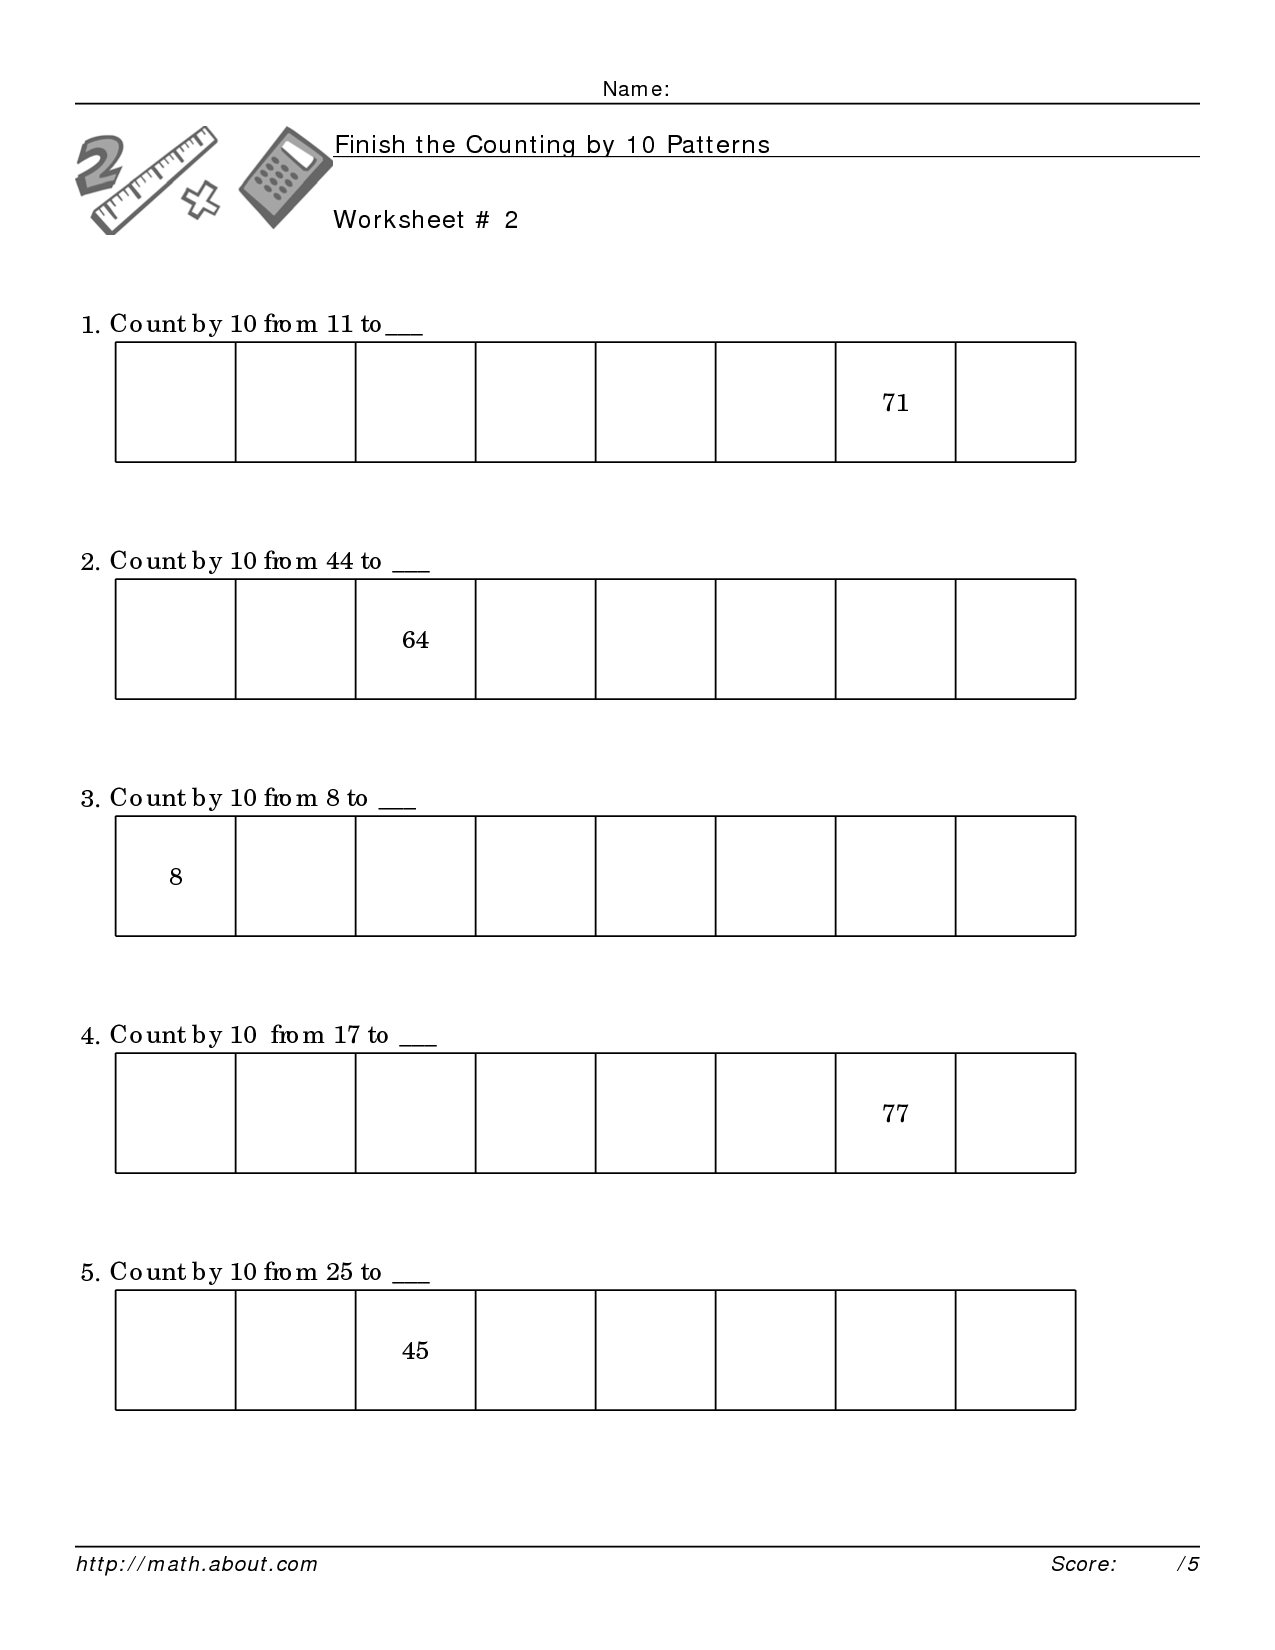 Counting By Tens Worksheet